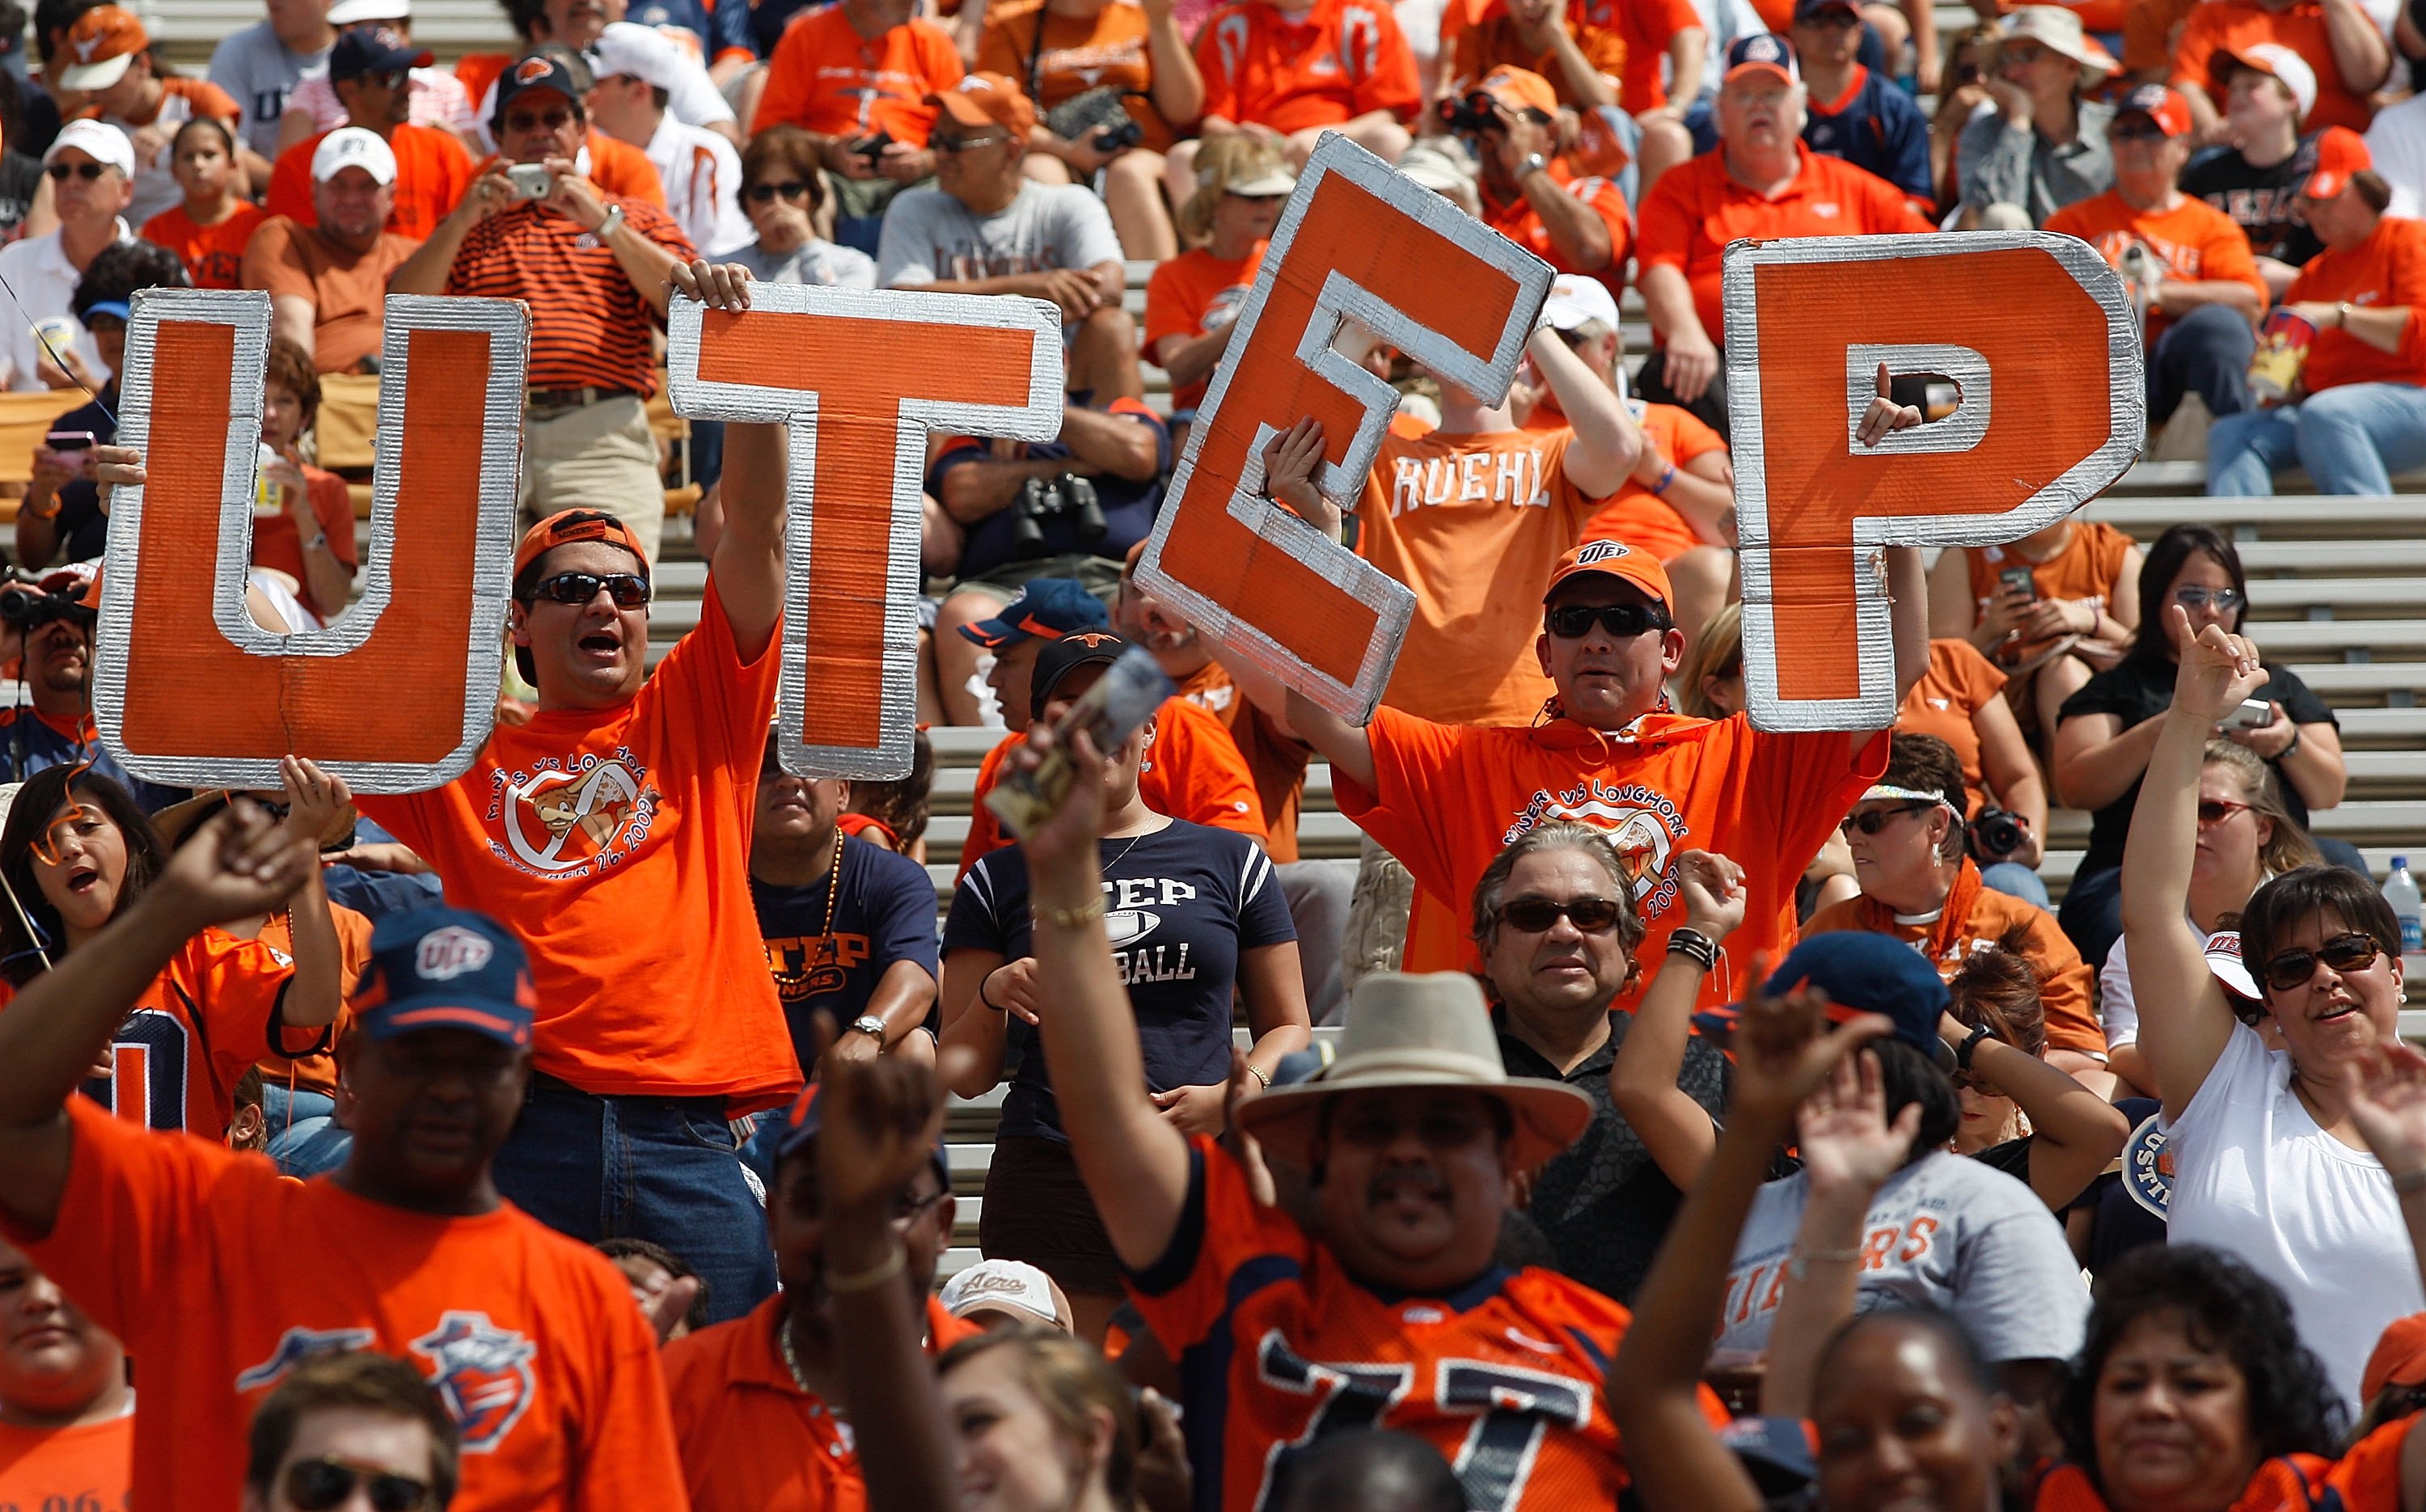 AUSTIN, TX - SEPTEMBER 26:  UTEP Miners fans before a game with the Texas Longhorns at Darrell K Royal-Texas Memorial Stadium on September 26, 2009 in Austin, Texas.  (Photo by Ronald Martinez/Getty Images)